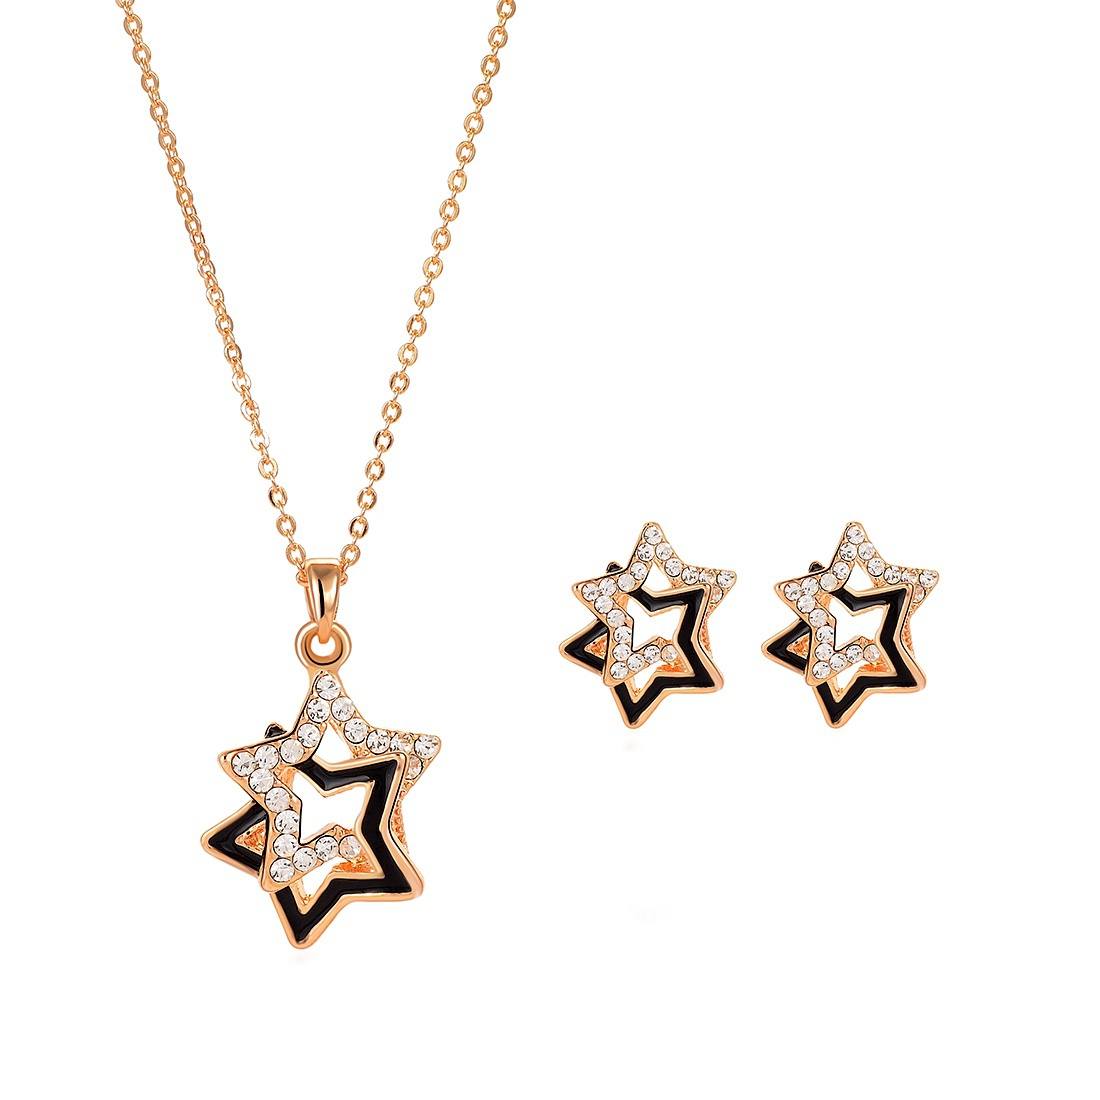 Romantic Wedding Crystal Sets Gold Jewelry Sets Star Pendant For Women Party